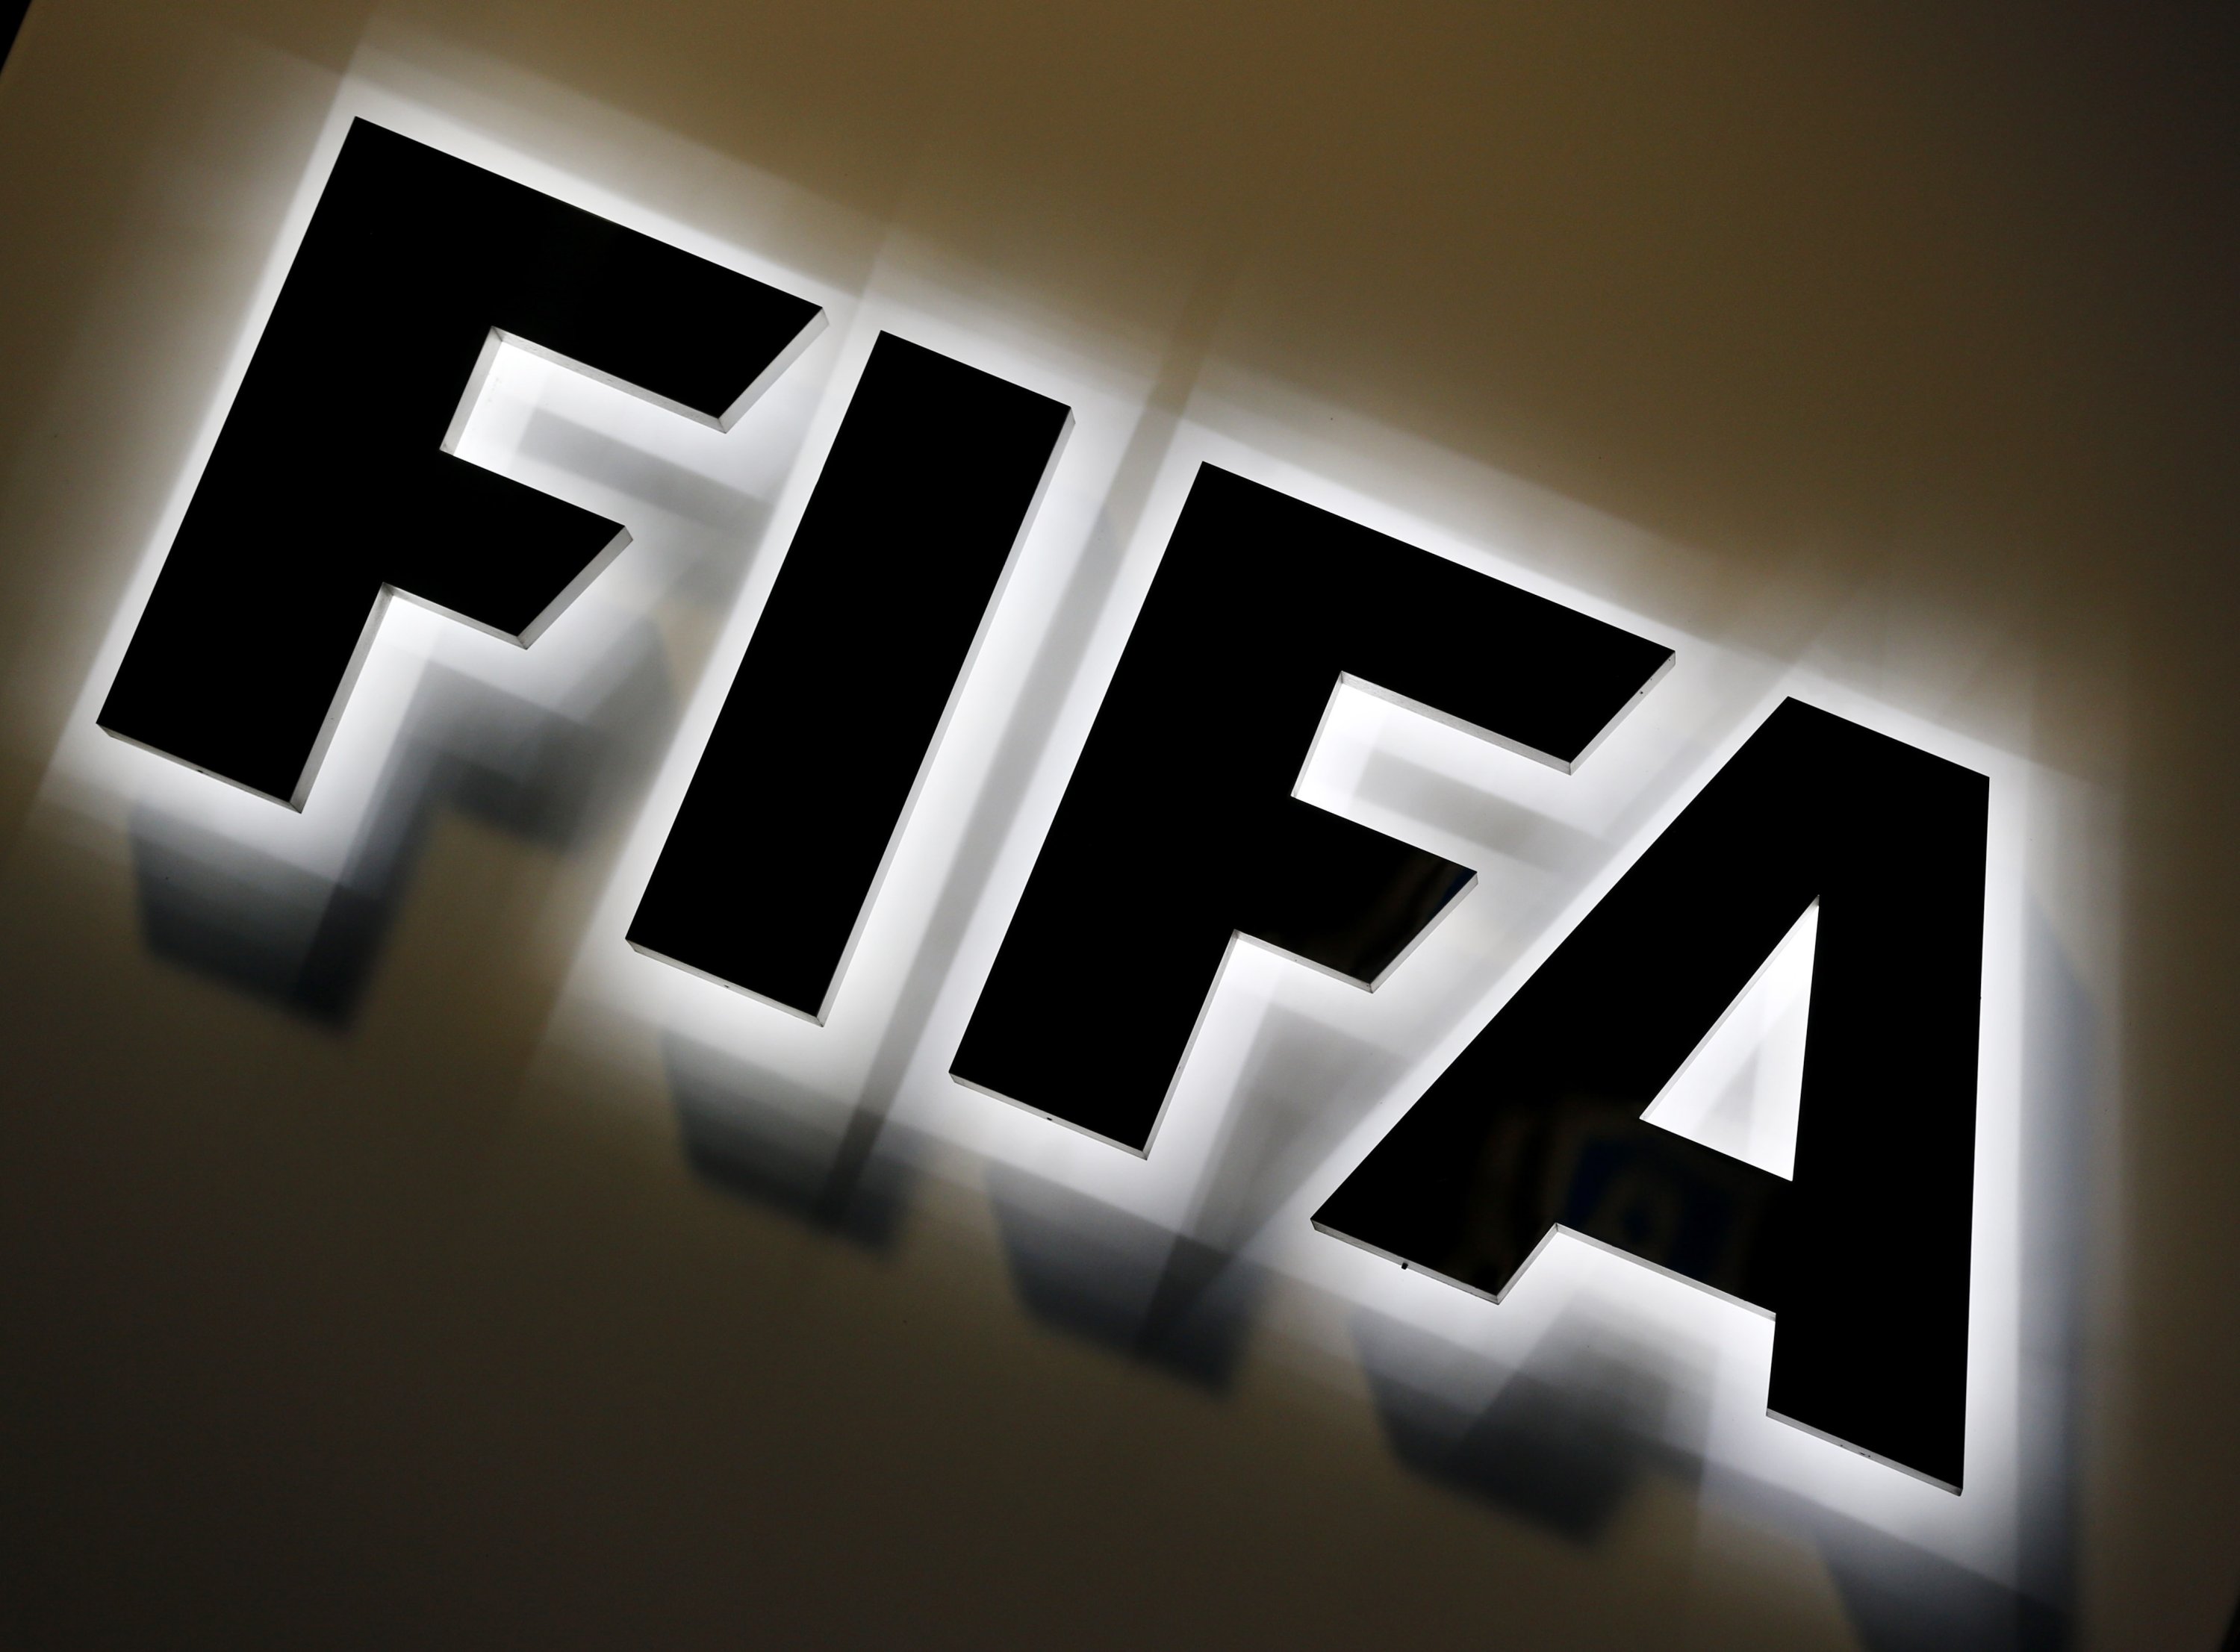 FIFA launches new streaming service for documentaries and live